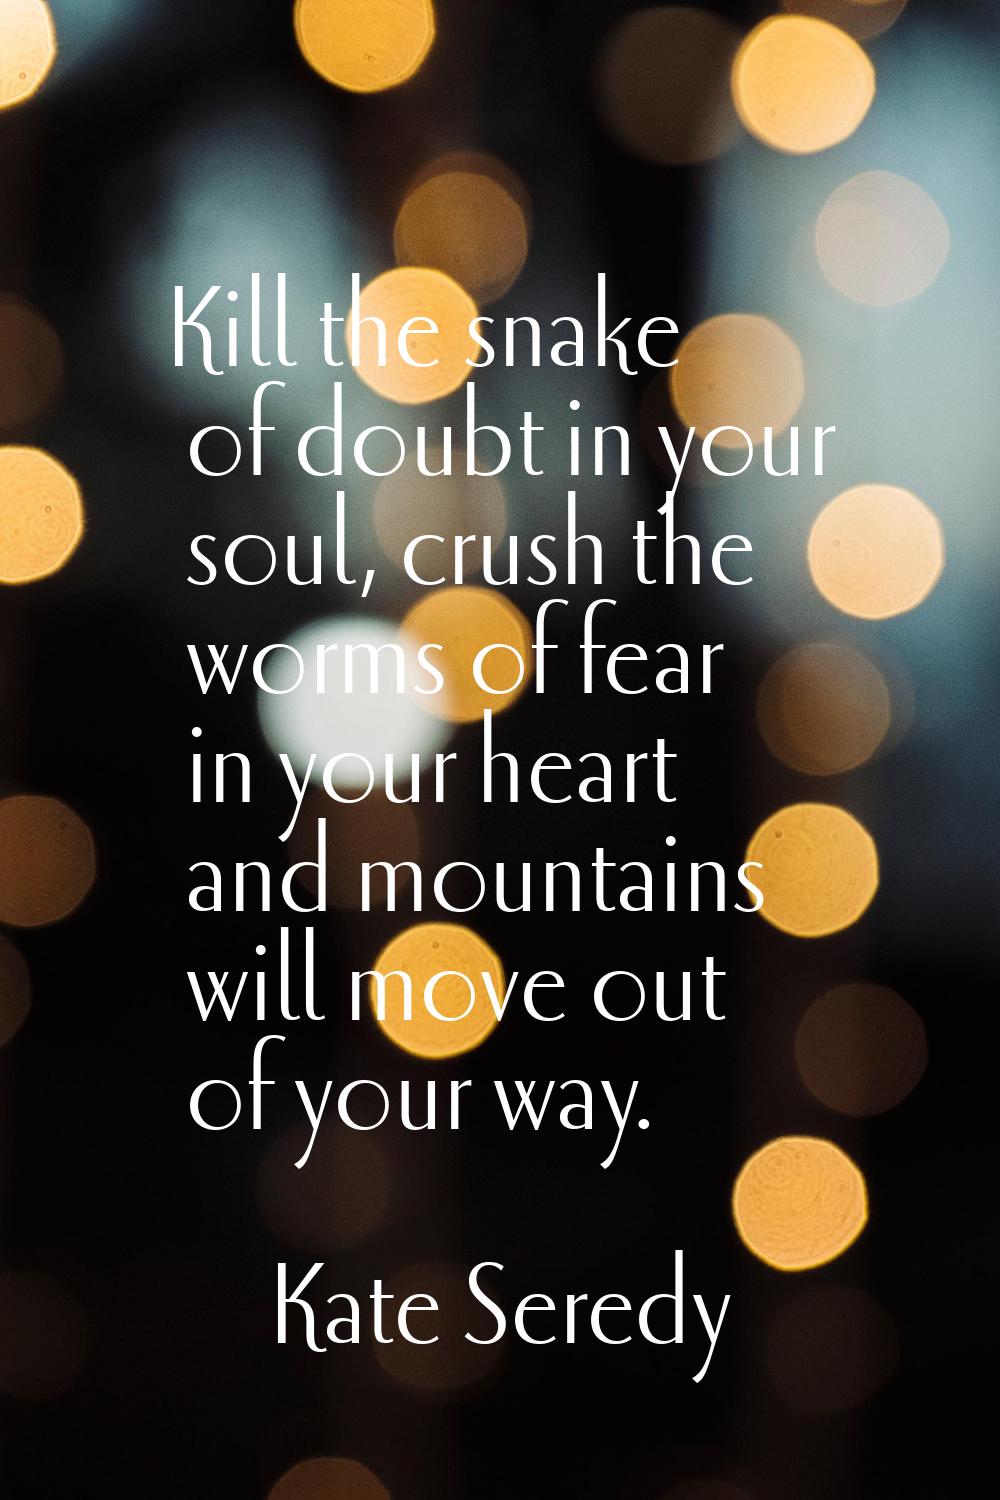 Kill the snake of doubt in your soul, crush the worms of fear in your heart and mountains will move